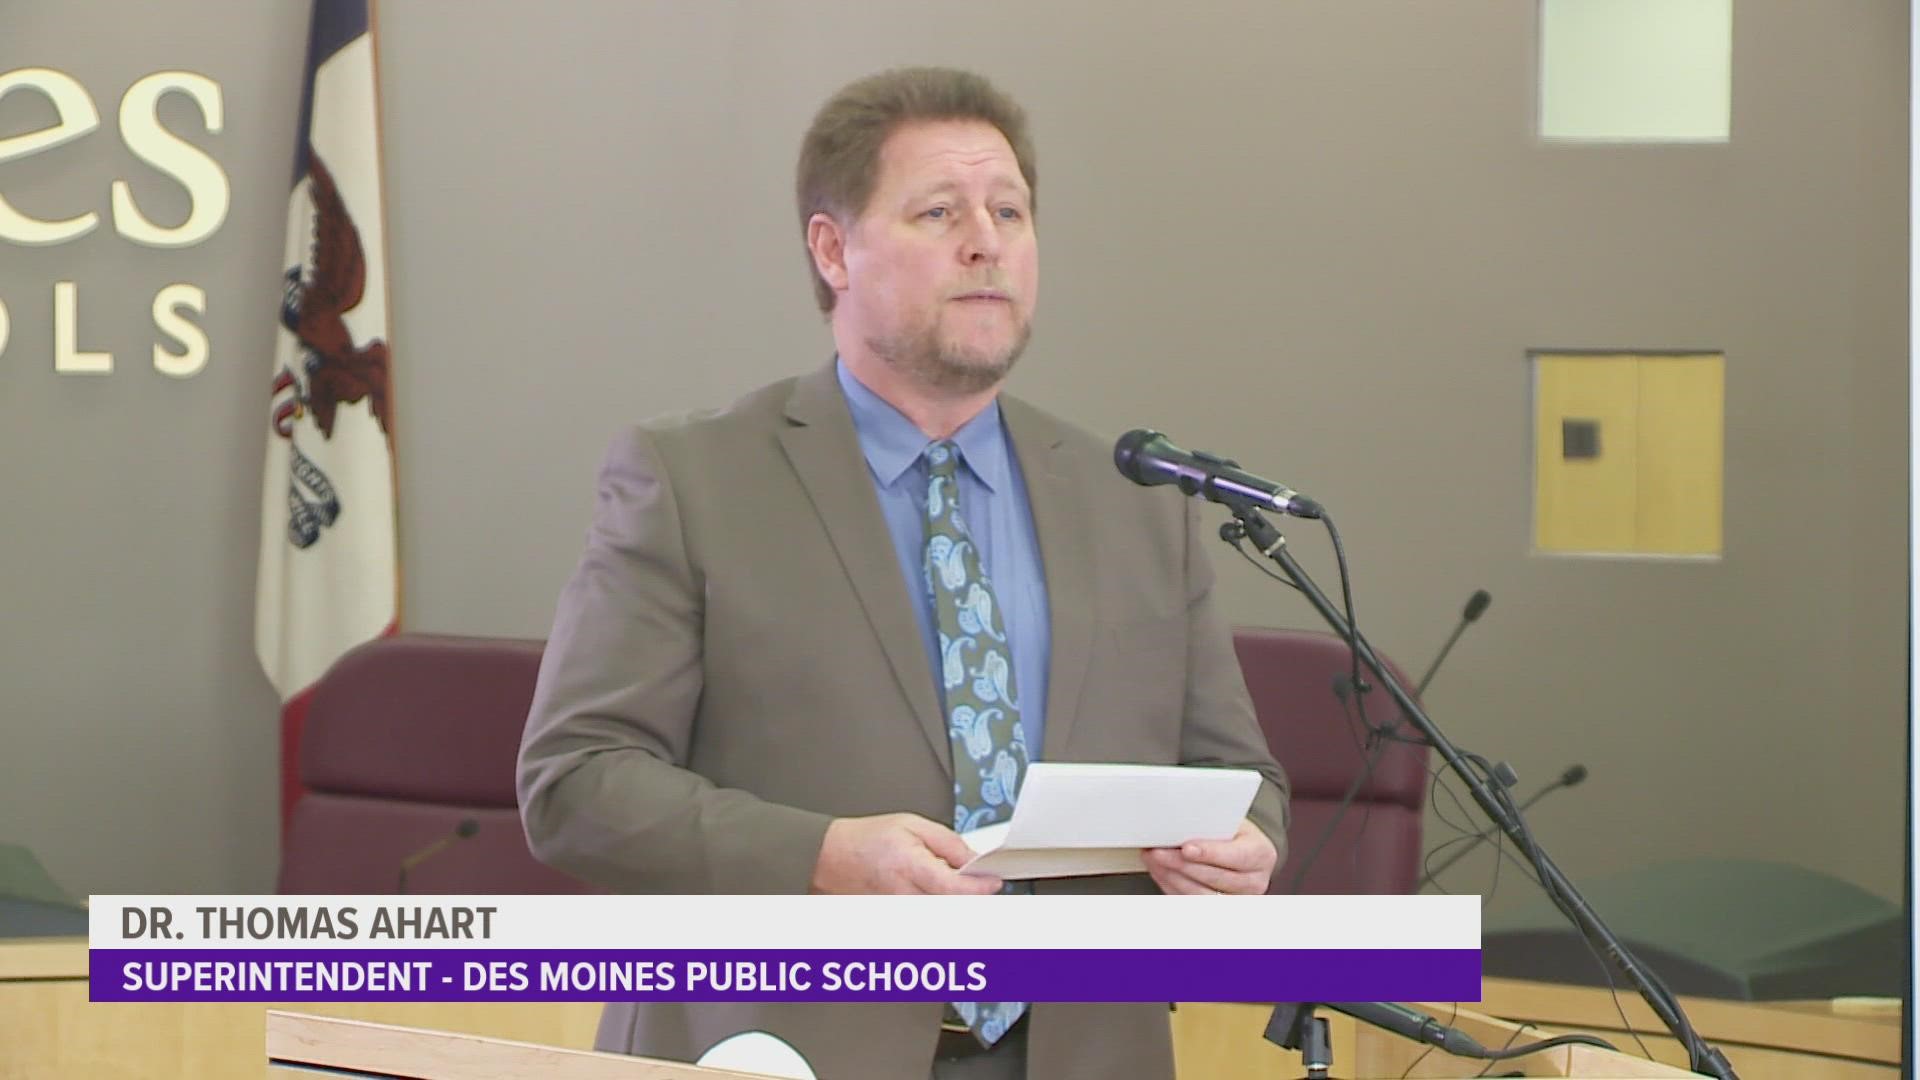 DMPS said they will appoint an interim superintendent for next school year with plans to have a replacement in place for the start of the 2023-24 school year.